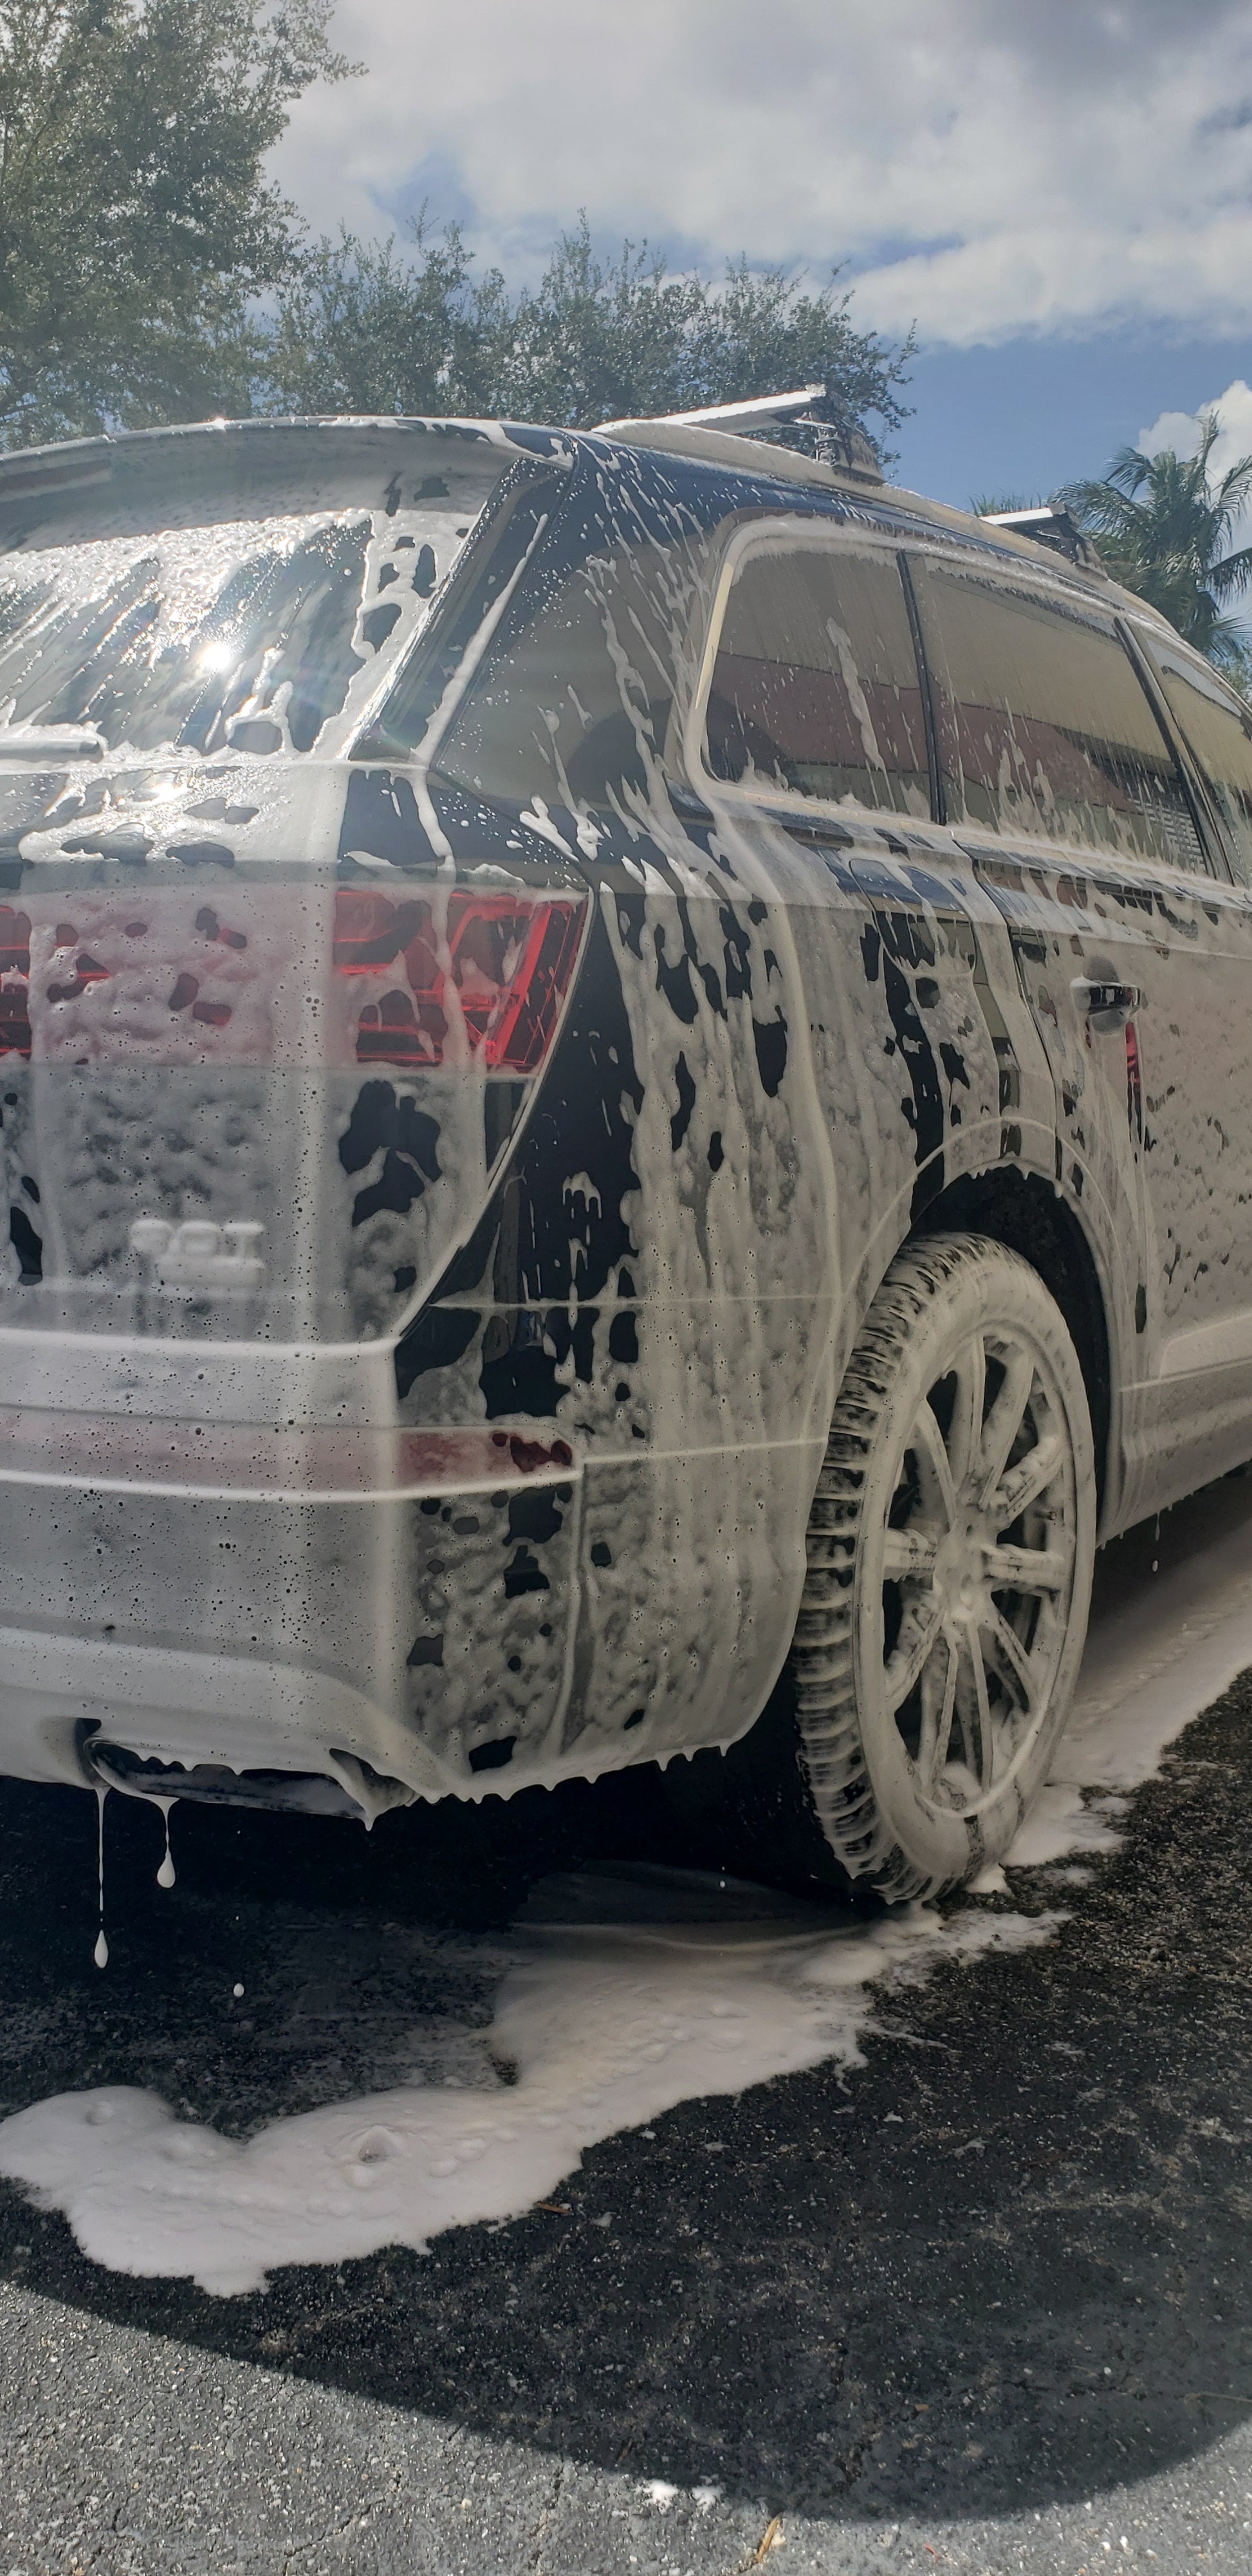 Outdoor Car Wash With Active Foam Soap. Commercial Cleaning Washing Service  Concept. Stock Photo, Picture and Royalty Free Image. Image 128219925.